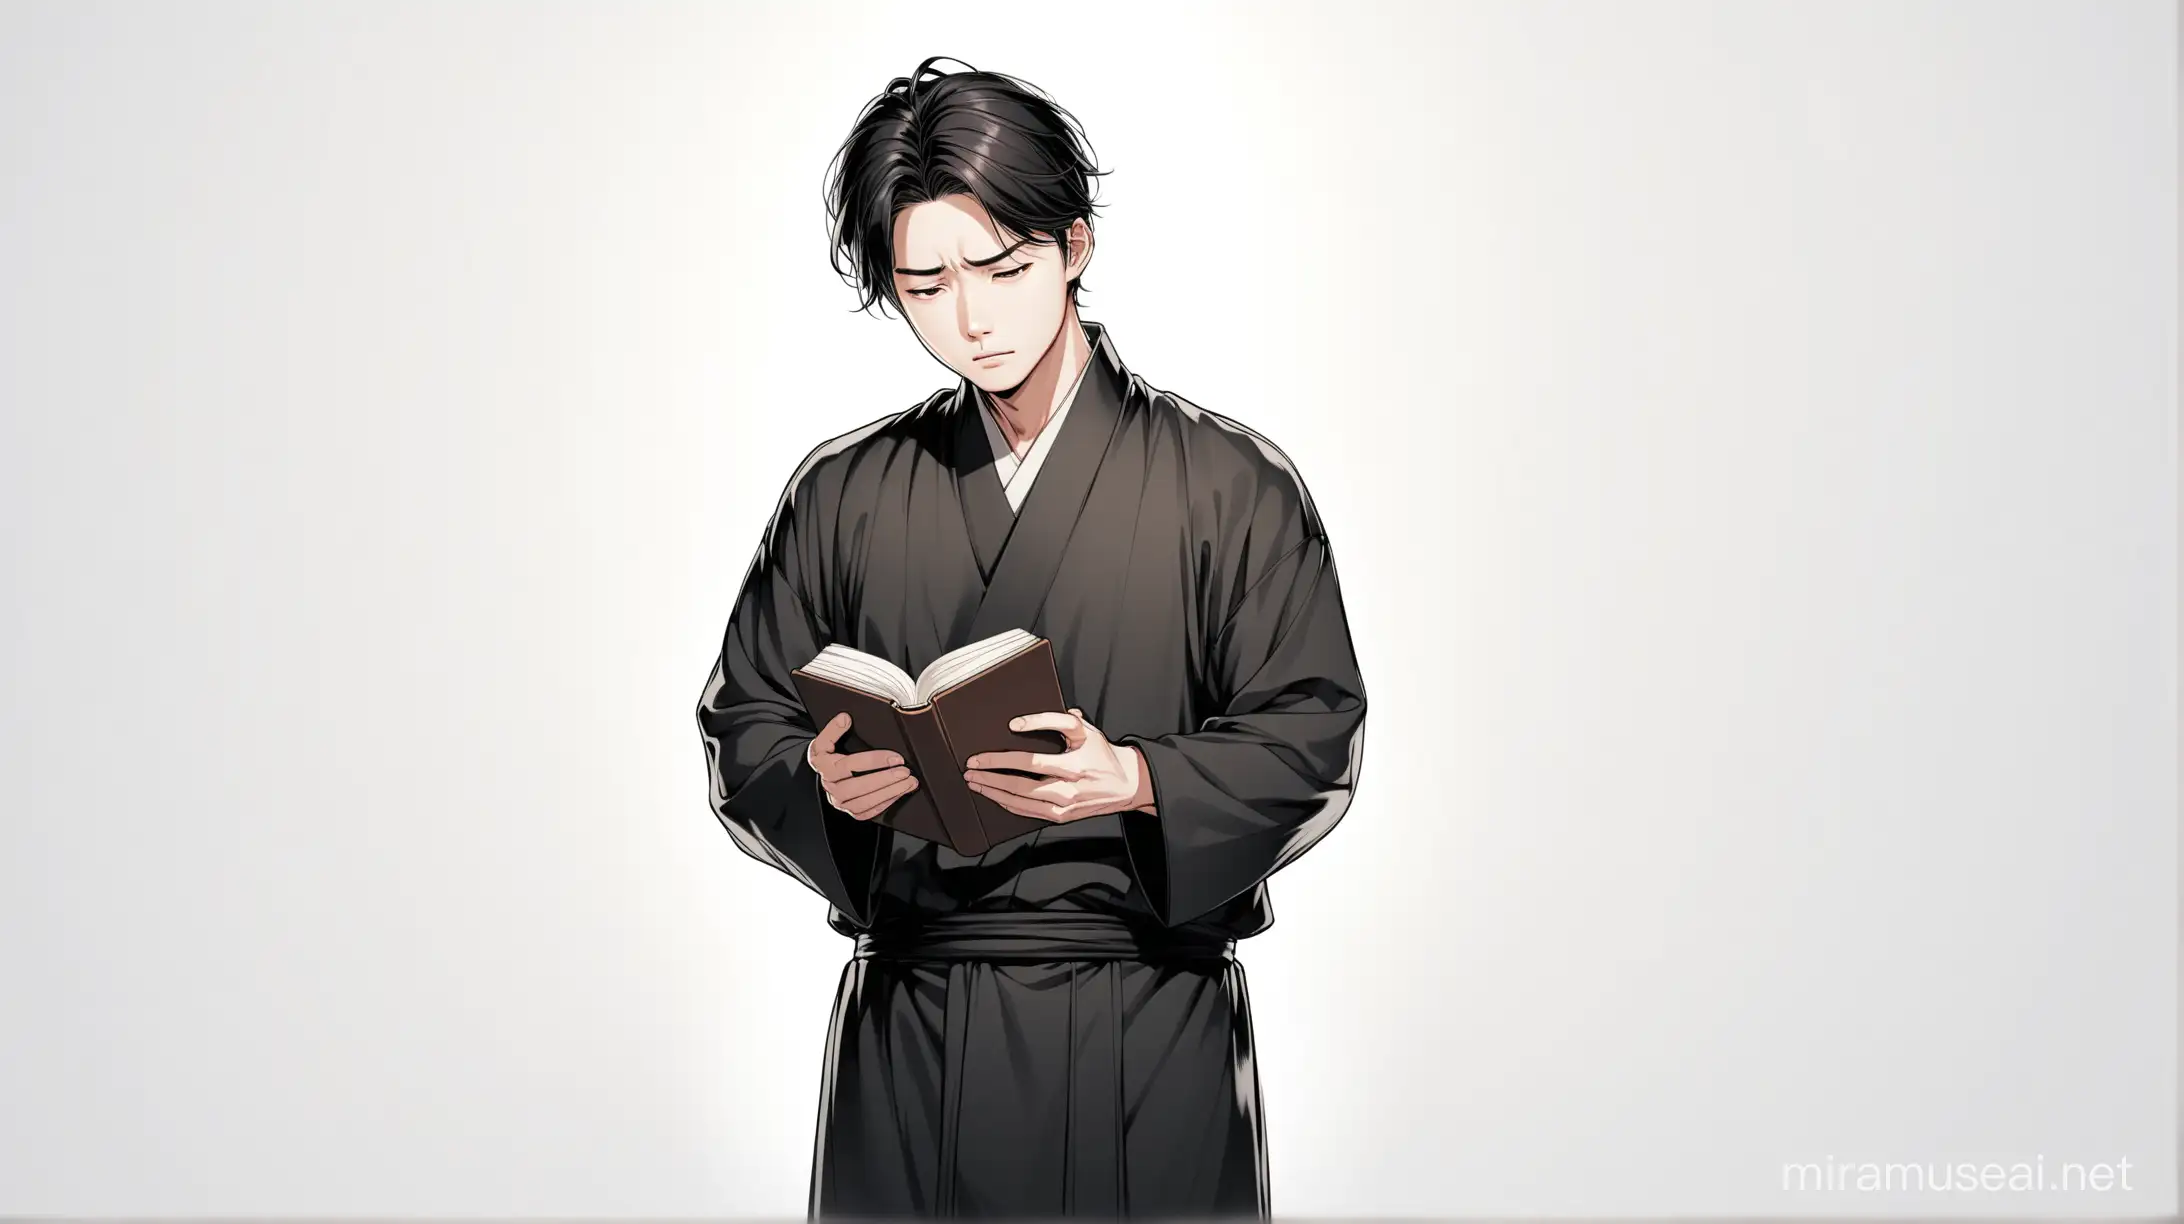 Draw the character of Korean Man, standing in a relaxed pose, wearing black korean outfit, holding a small book in his right hand, anxious expession, wide angle, a plain white background